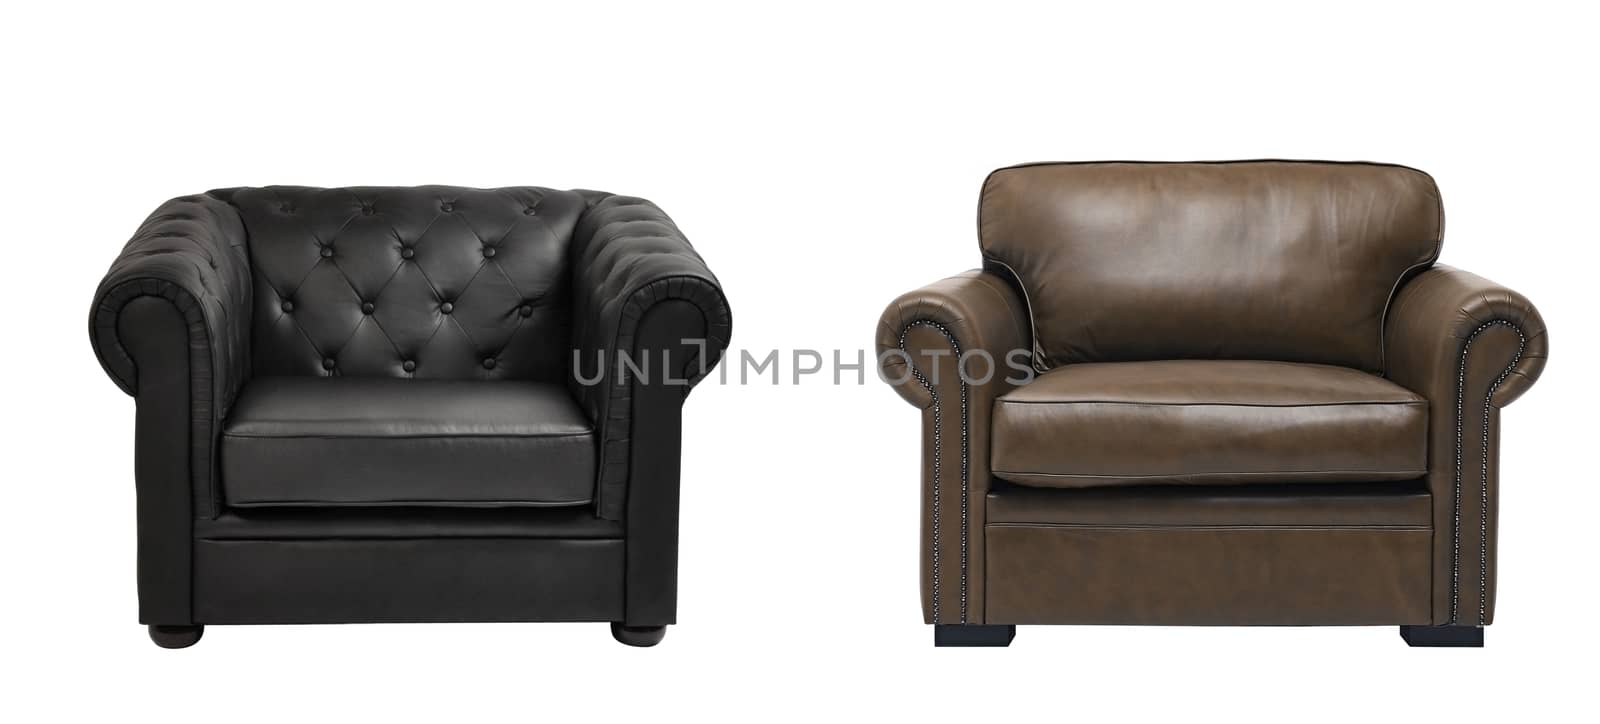 two nice leather arm chairs by ozaiachin